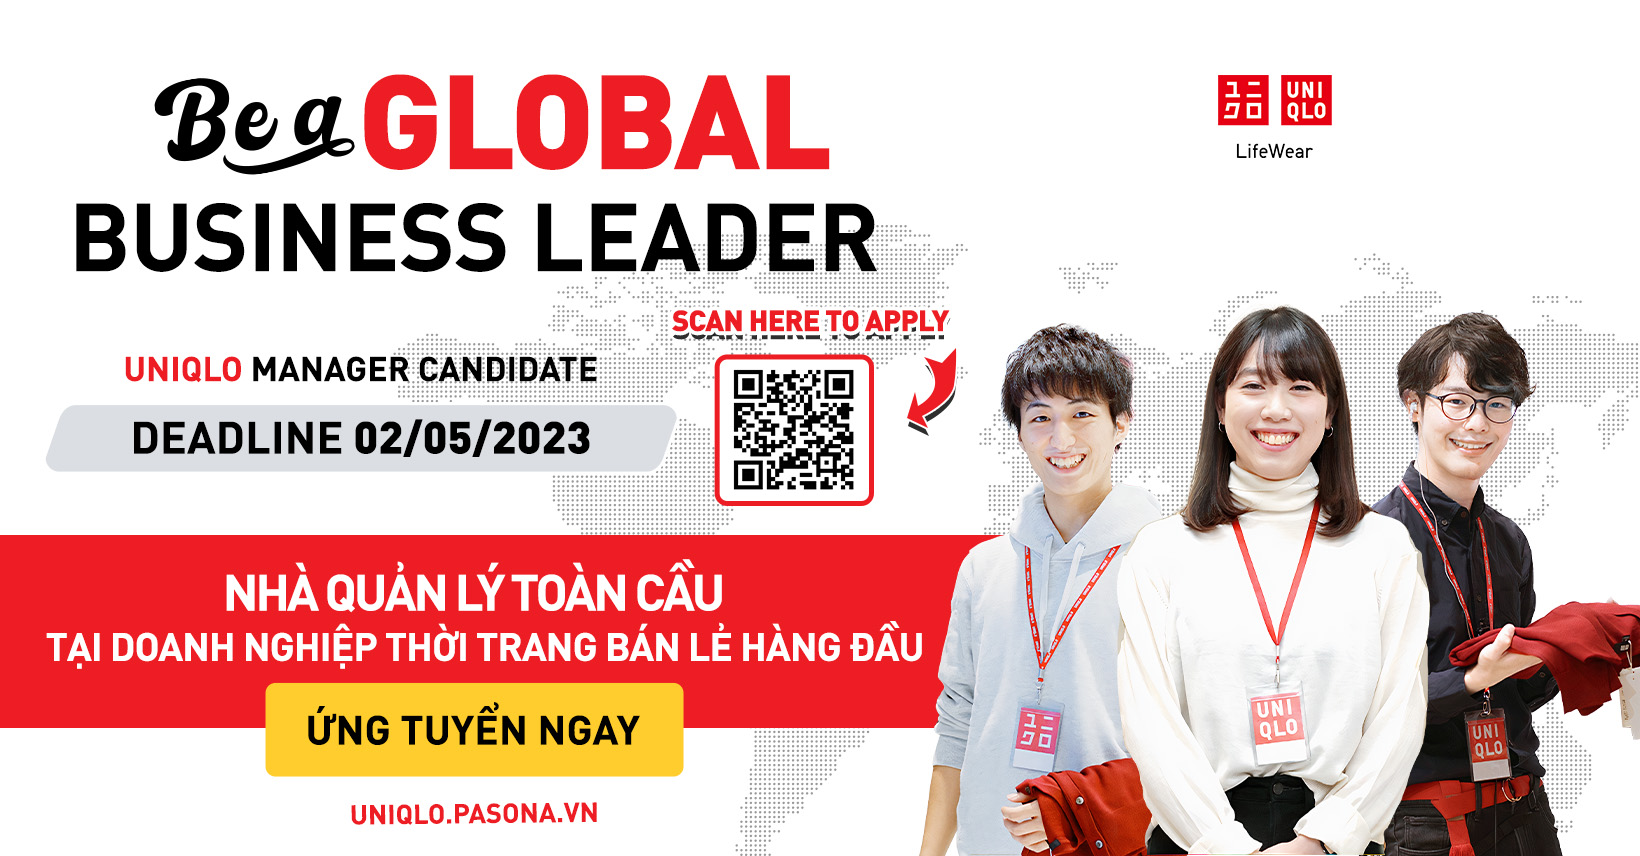 Anh Hoang  Uniqlo Manager Candidate  UNIQLO  LinkedIn